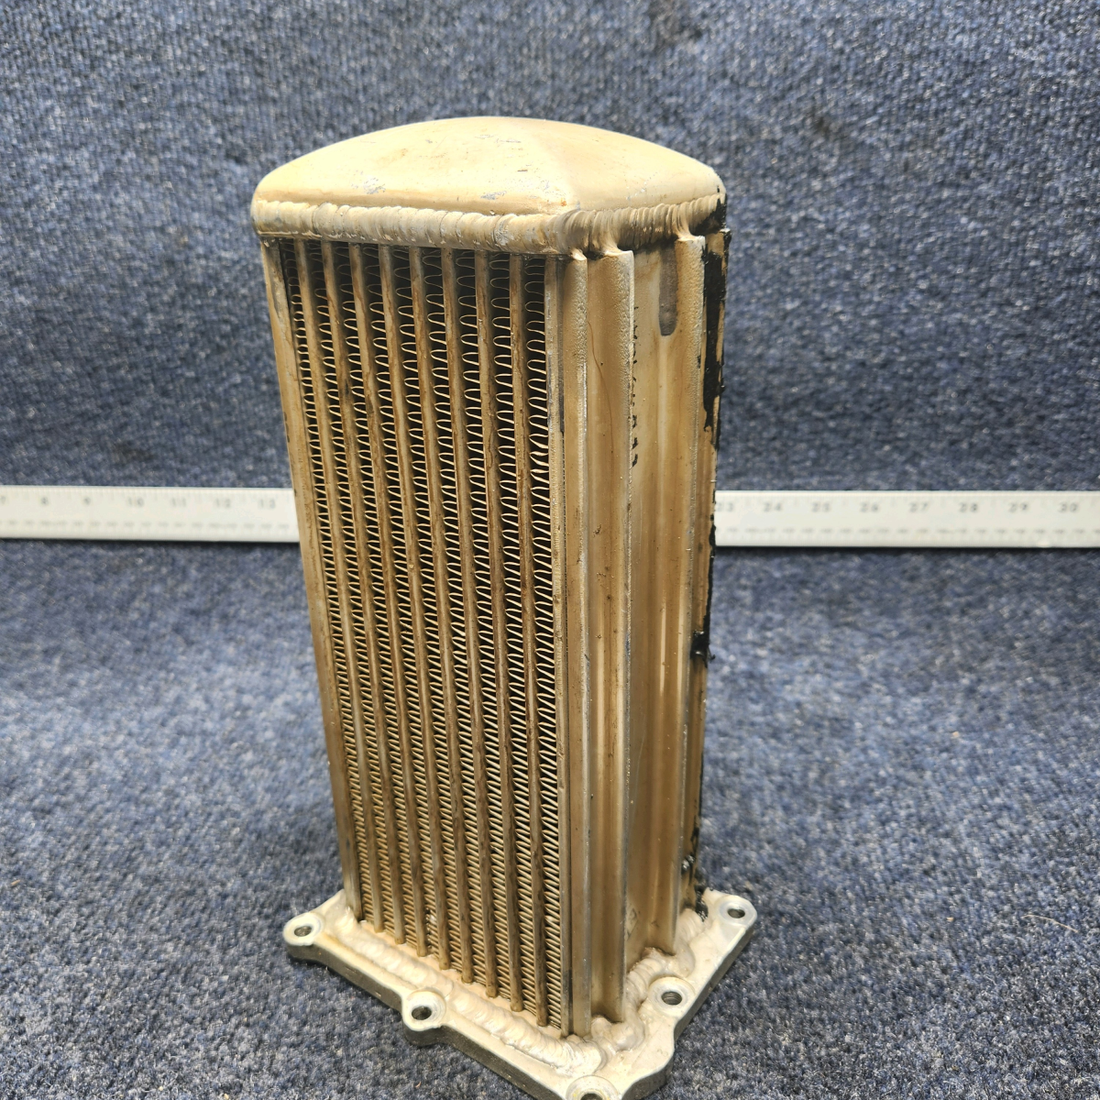 Used aircraft parts for sale, 642063 Continental TCM OIL COOLER ASSEMBLY "SEE PHOTOS"